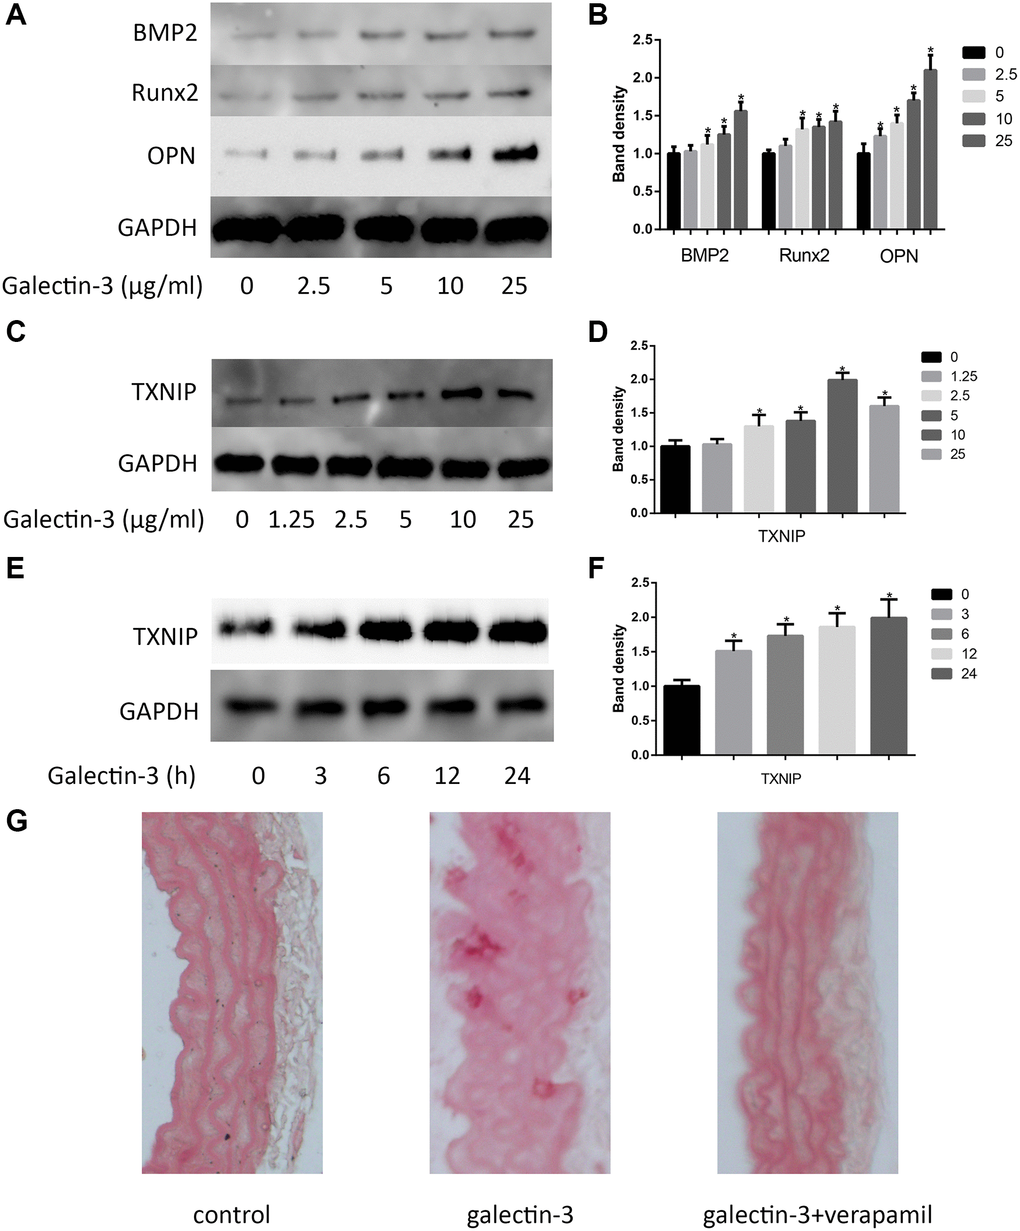 Galectin-3 induced aorta and VSMCs calcification. Cells were treated with galectin-3 over a range of concentrations (0, 2.5 μg/ml, 5 μg/ml, 10 μg/ml, 25 μg/ml) for 24 h, VSMCs osteogenic differentiation proteins (BMP2, Runx2 and OPN) were measured by Western blot, the quantification result is shown in the right panel (A and B). VSMCs were treated with galectin-3 over a range of concentrations (0, 1.25 μg/ml, 2.5 μg/ml, 5 μg/ml, 10 μg/ml, 25 μg/ml) for 24 h, TXNIP expression was measured by Western blot (C), the quantification result is shown in the right panel (D). 10 μg/ml galectin-3 was used to deal with VSMCs for different times (0, 3 h, 6 h, 12 h, 24 h), TXNIP expression was measured by Western blot (E), the quantification result is shown in the right panel (F). Band density of native VSMCs was defined as a control and considered to 1. Representative images of Alizarin Red staining of aorta (G). All experiments were performed at least three times. *P 